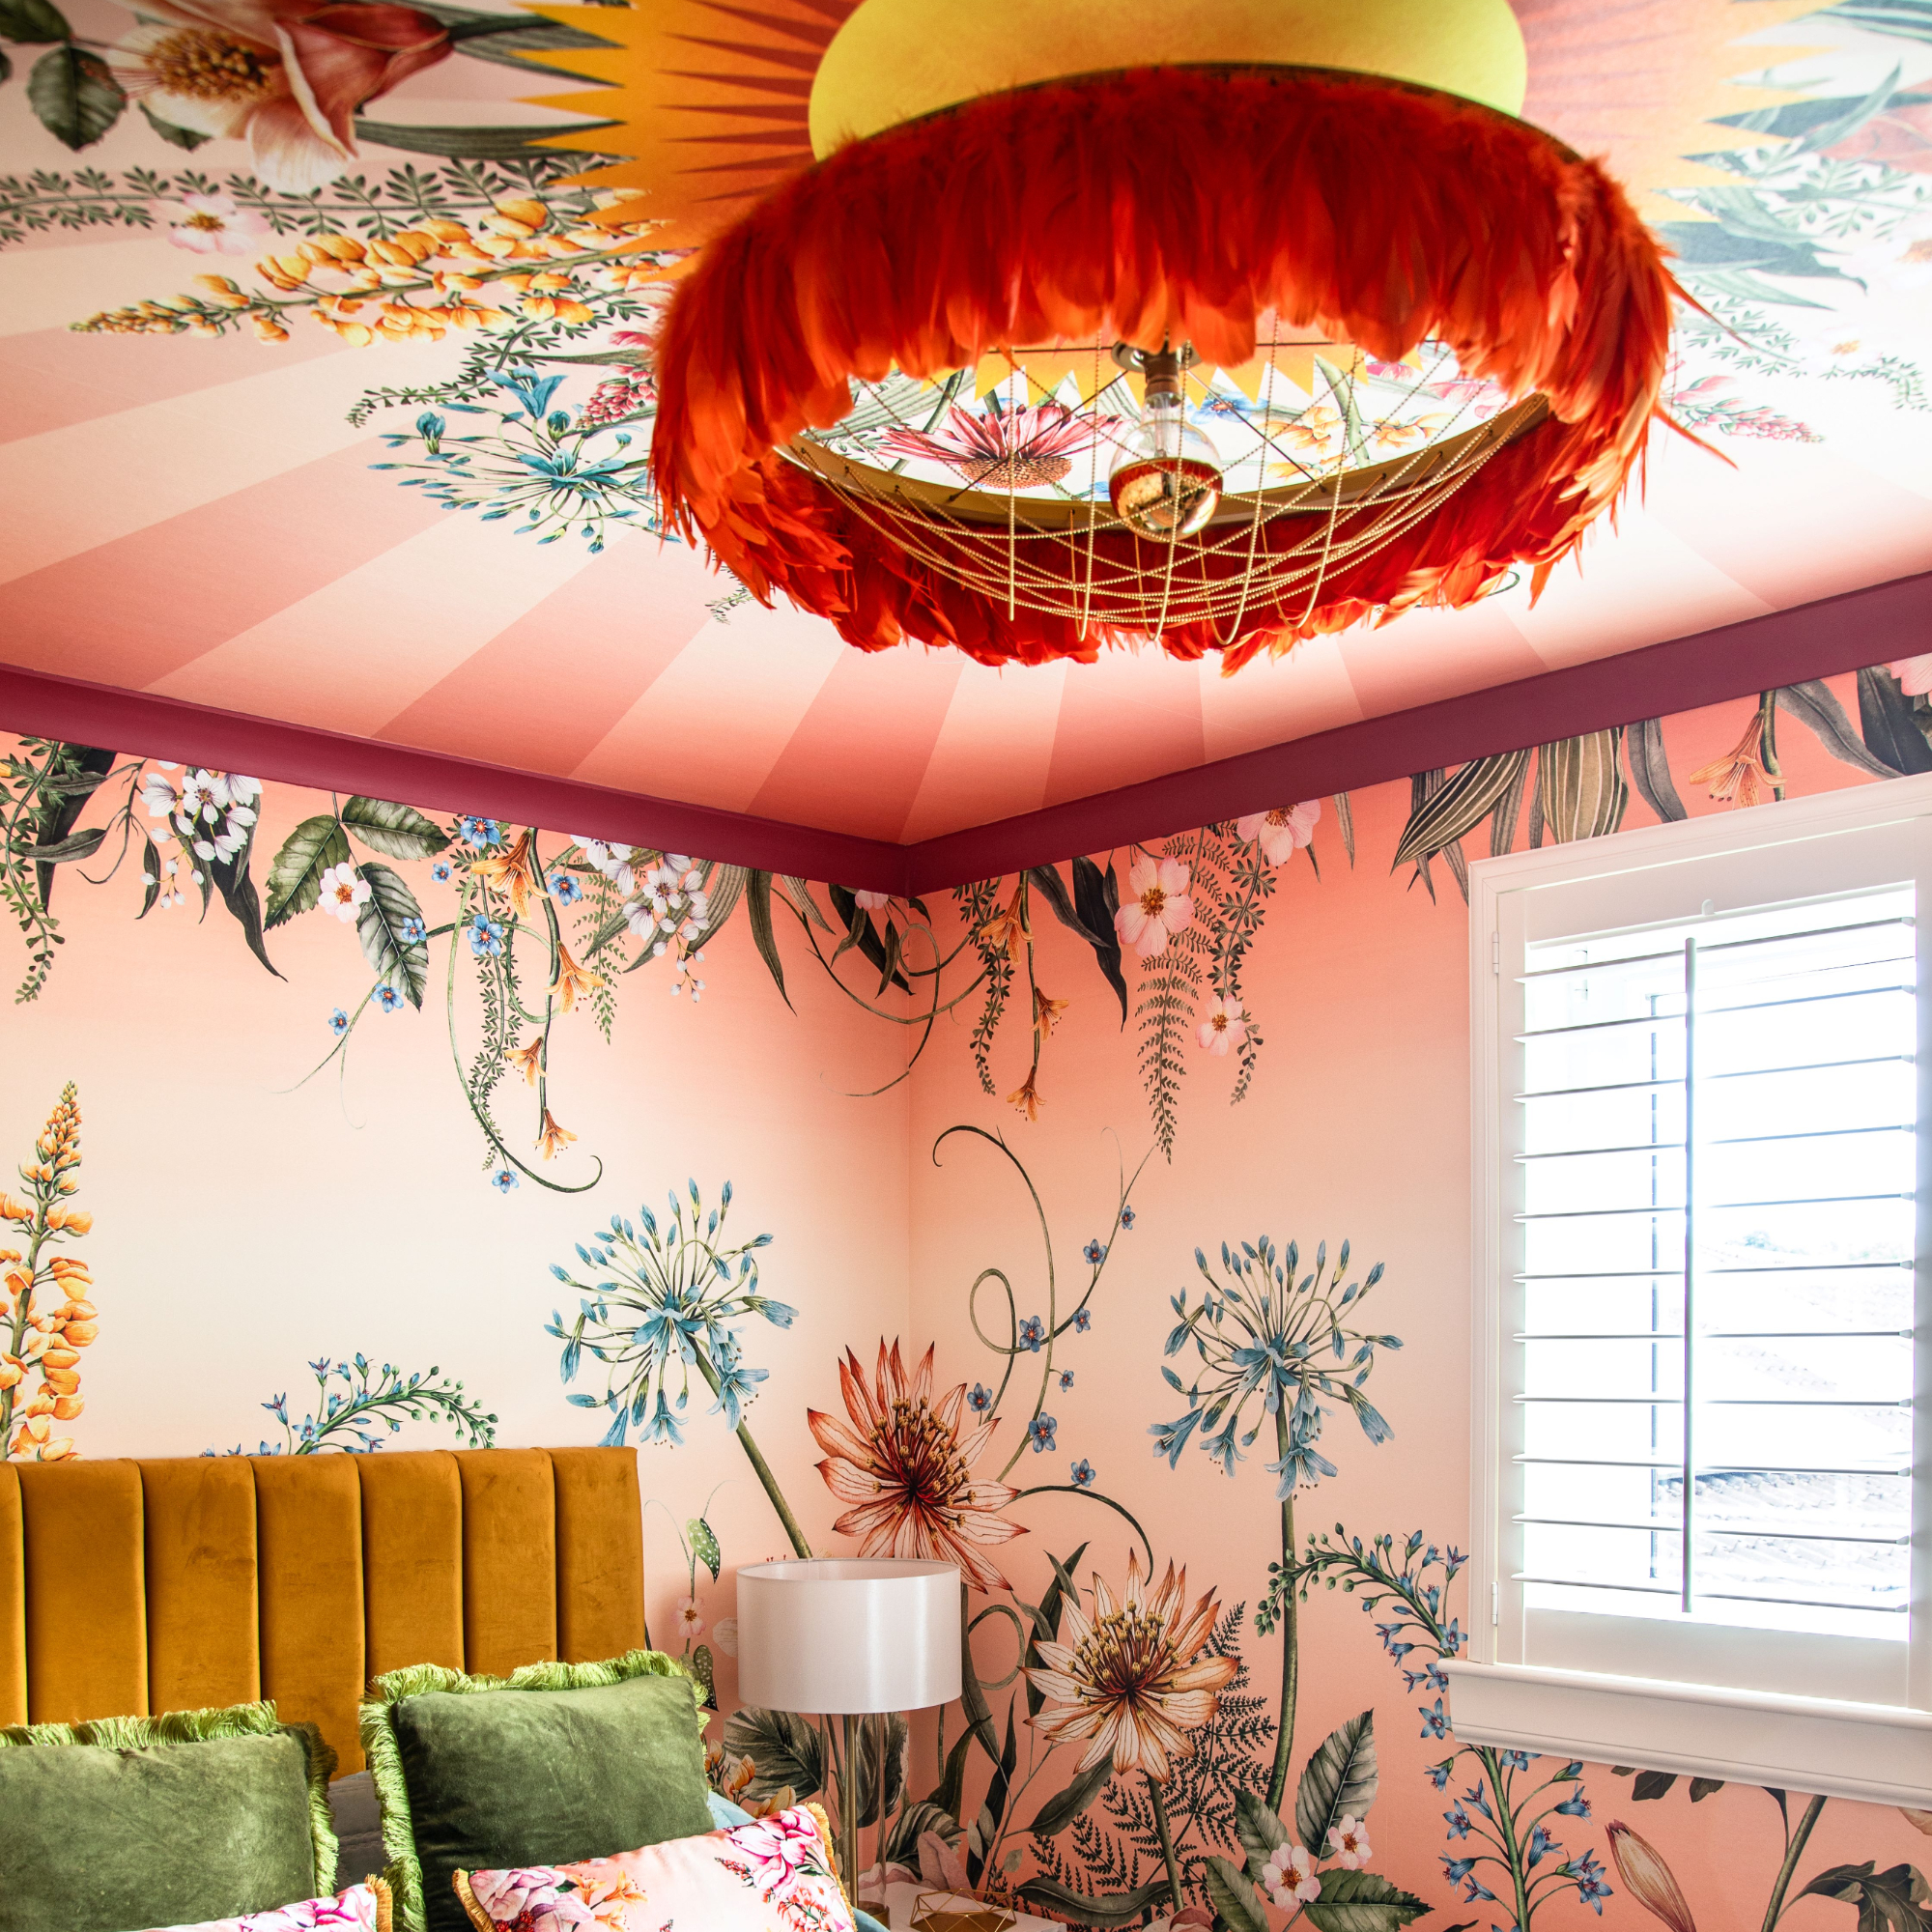 Pink, floral ceiling and wall mural in bedroom with large pendant lighting